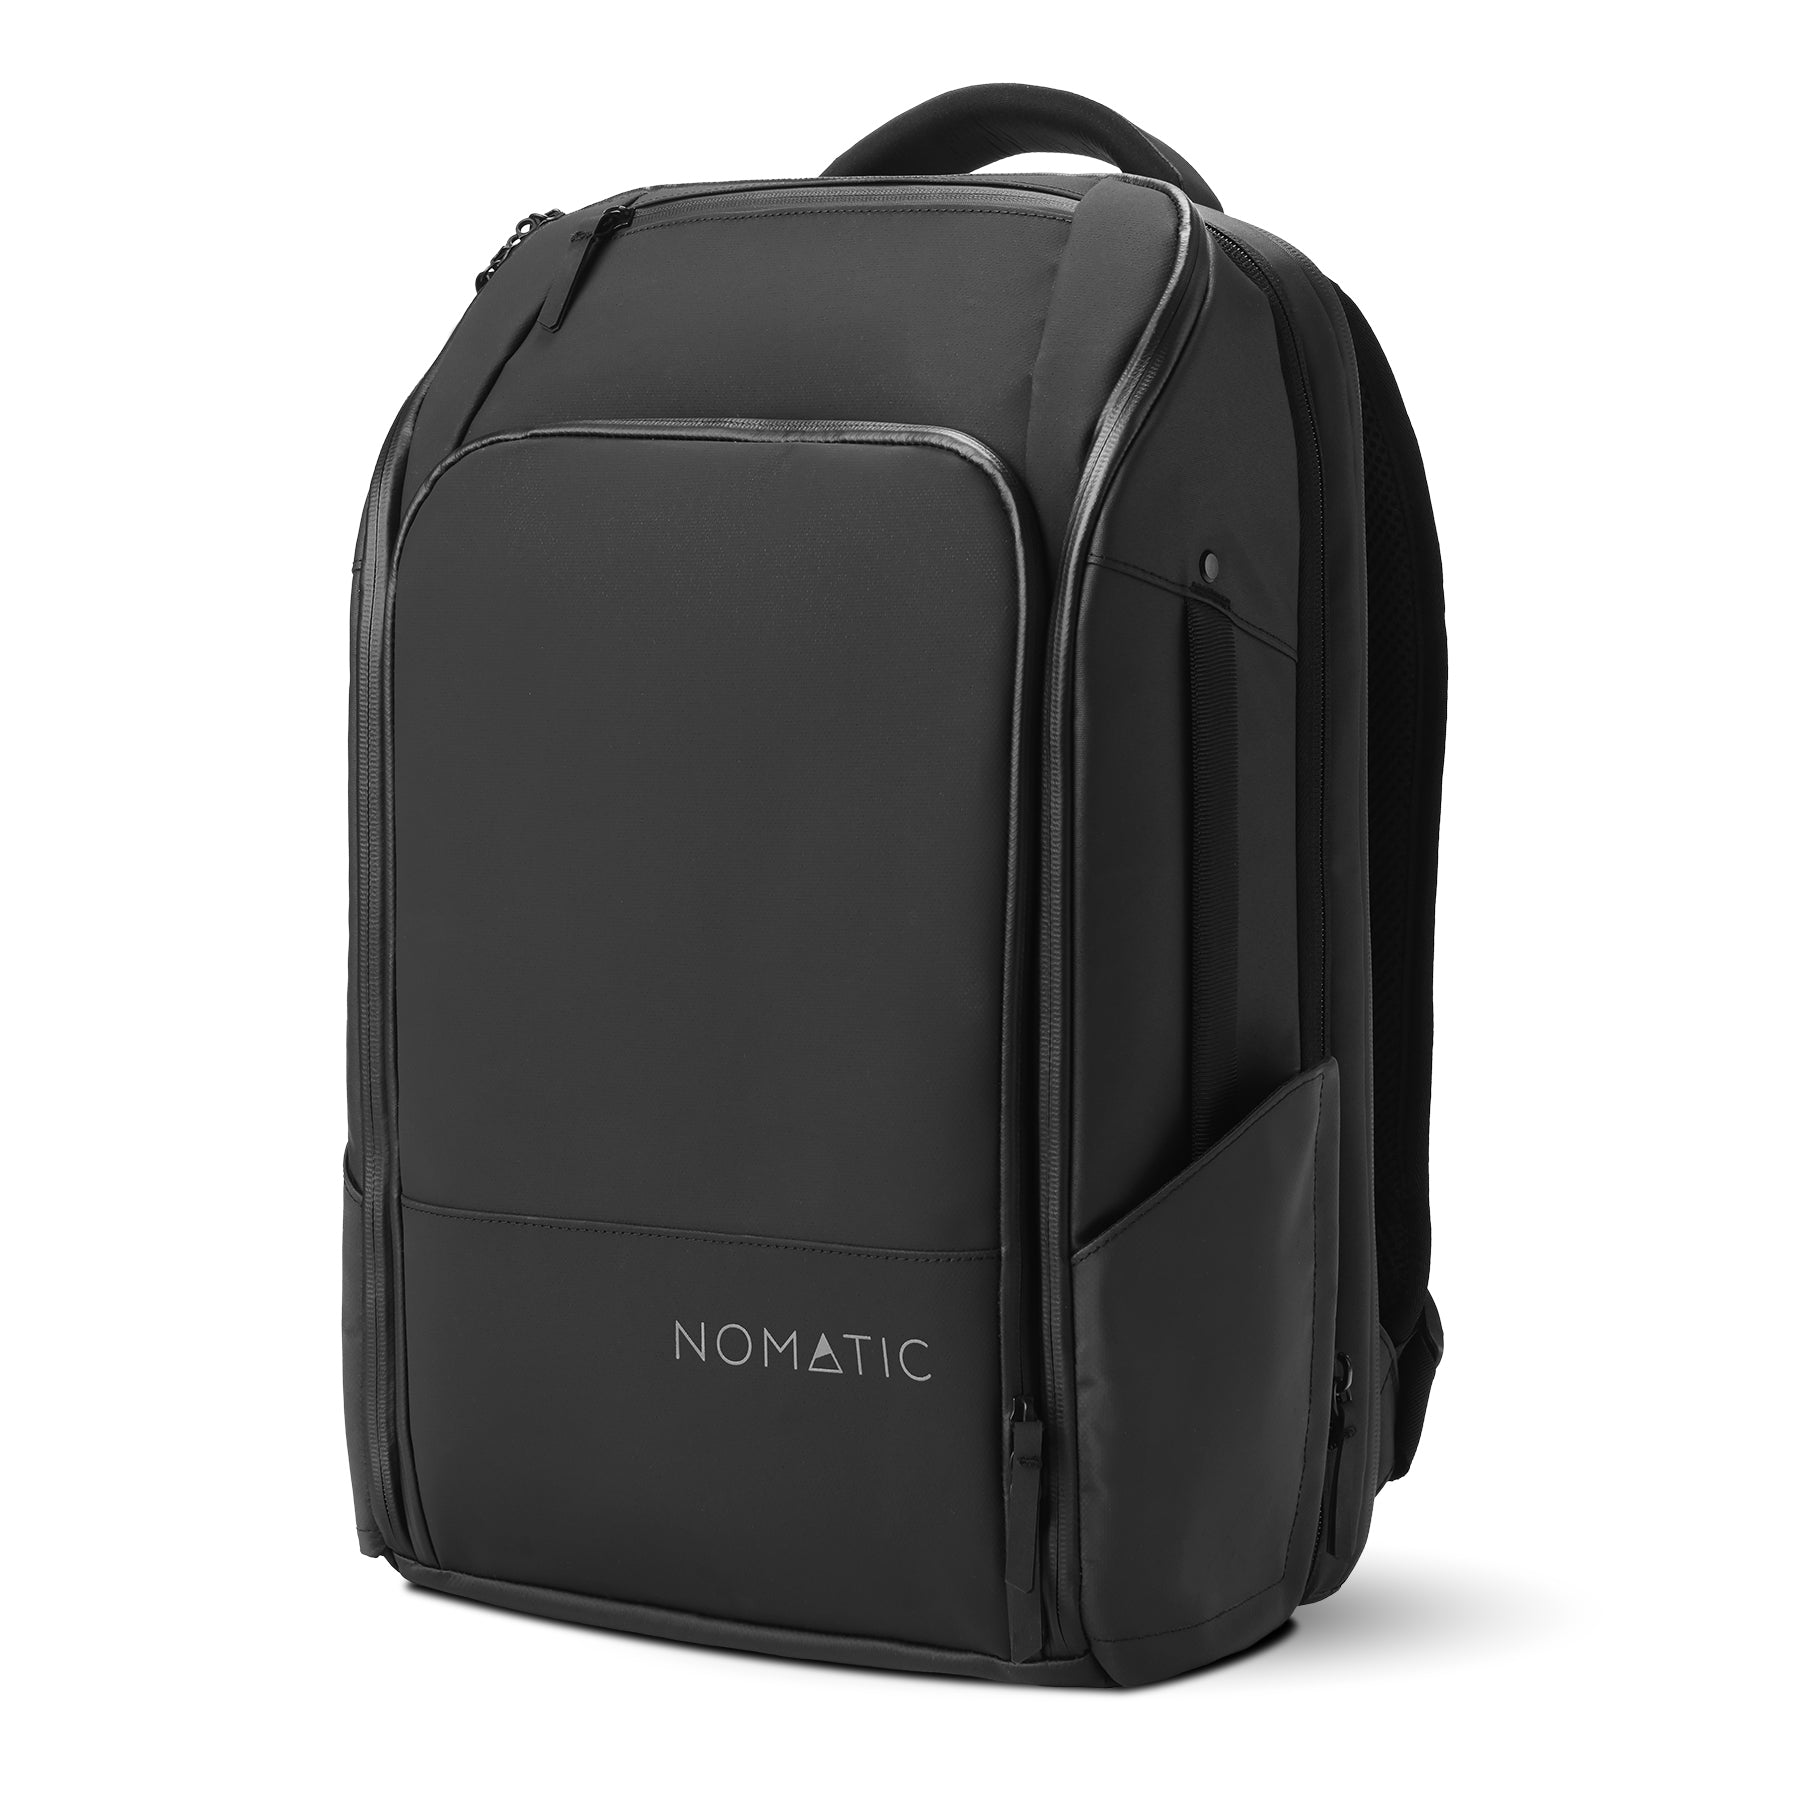 NOMATIC Travel Pack 旅行背包 (20L) 相機袋/鏡頭袋